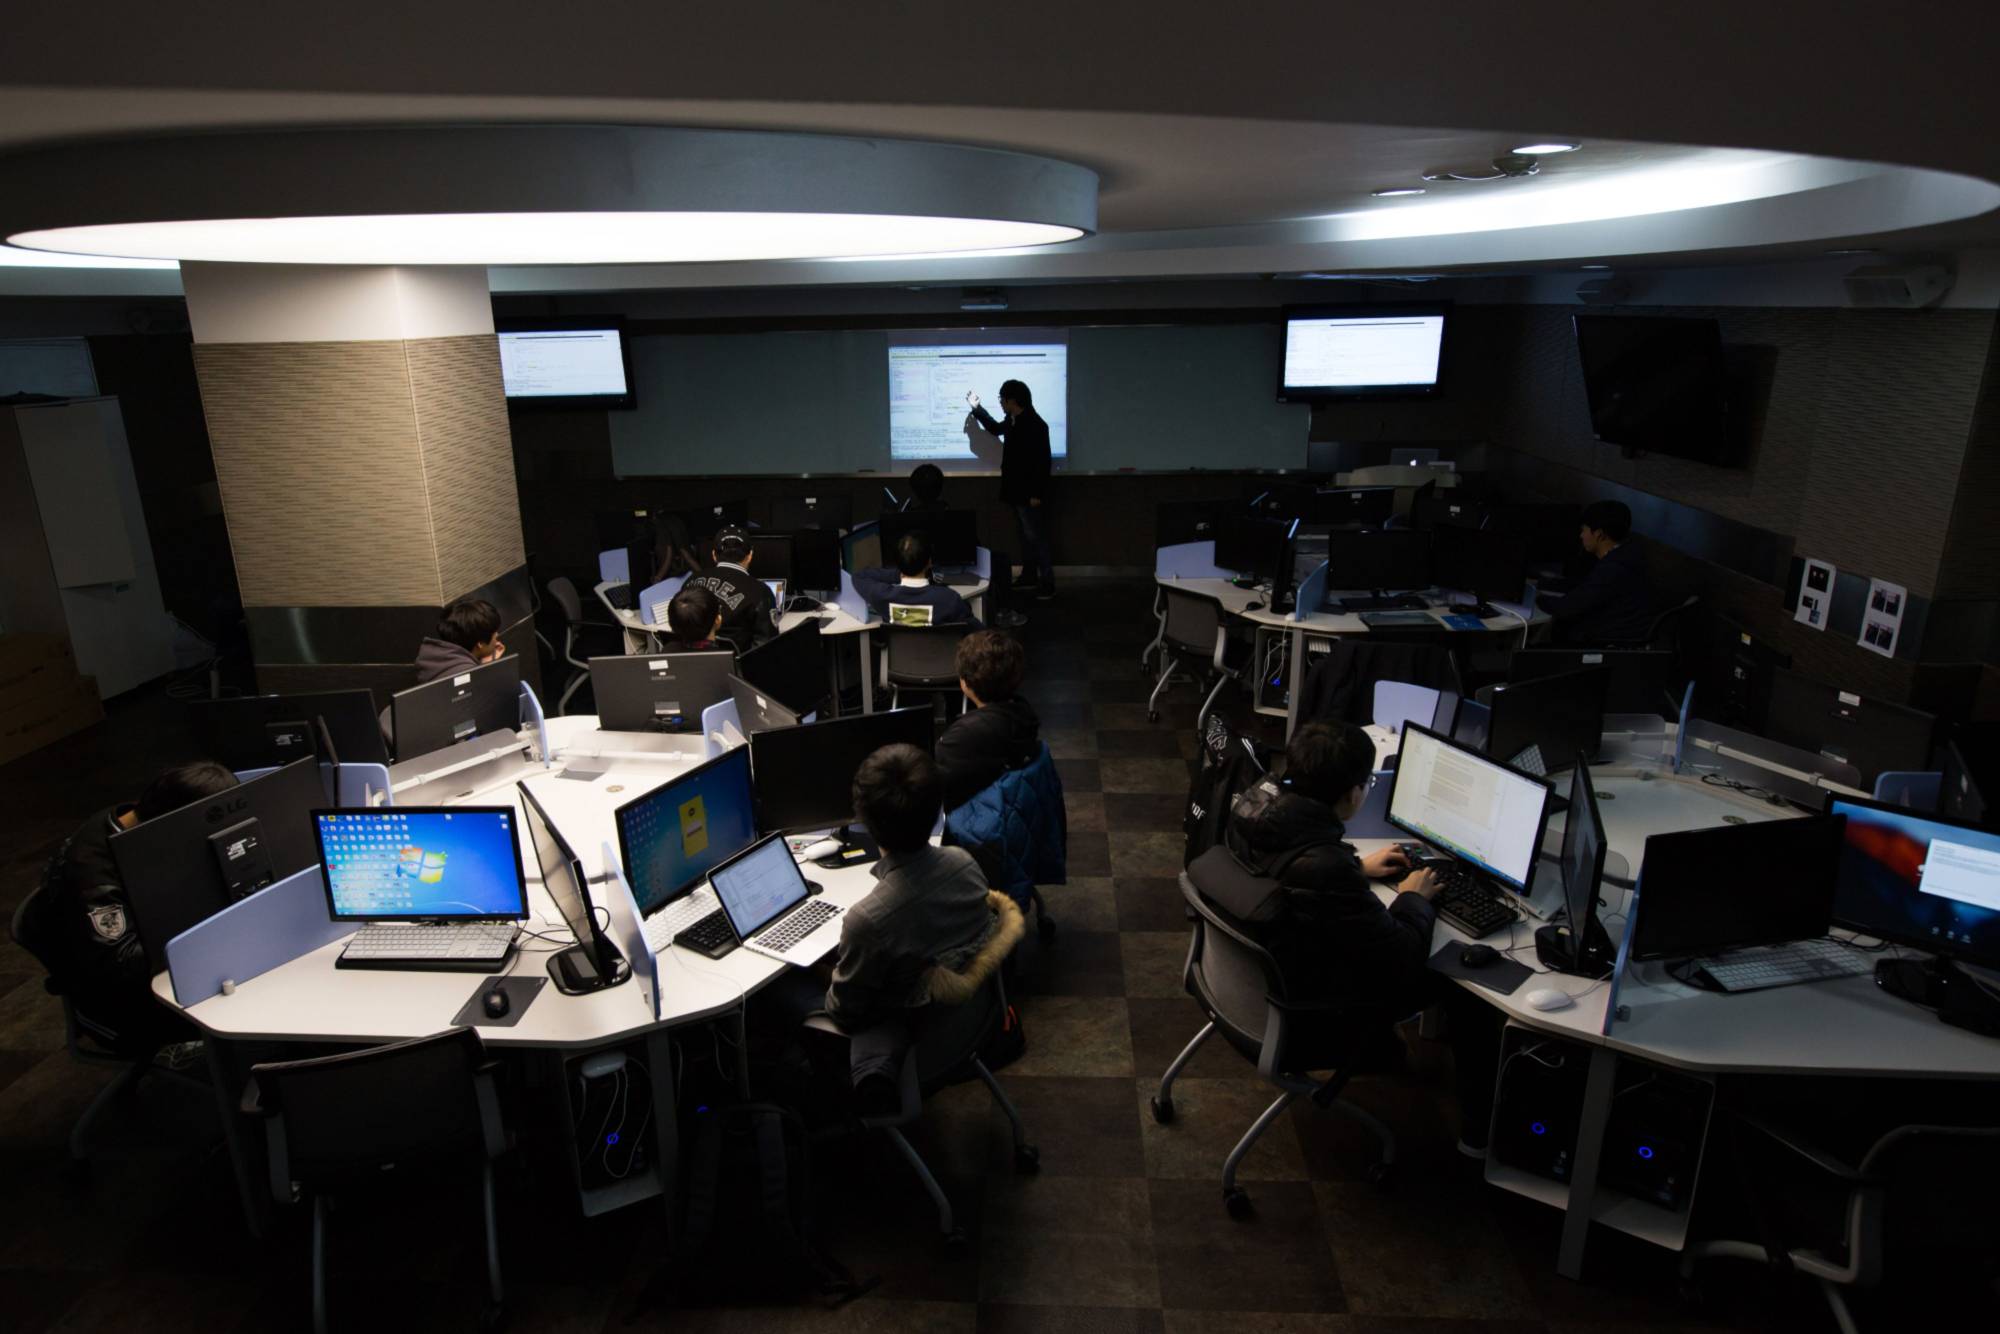 Students sit at computers during a cyberdefense programming class in the 'War Room' at Korea University in Seoul in November 2015. | BLOOMBERG